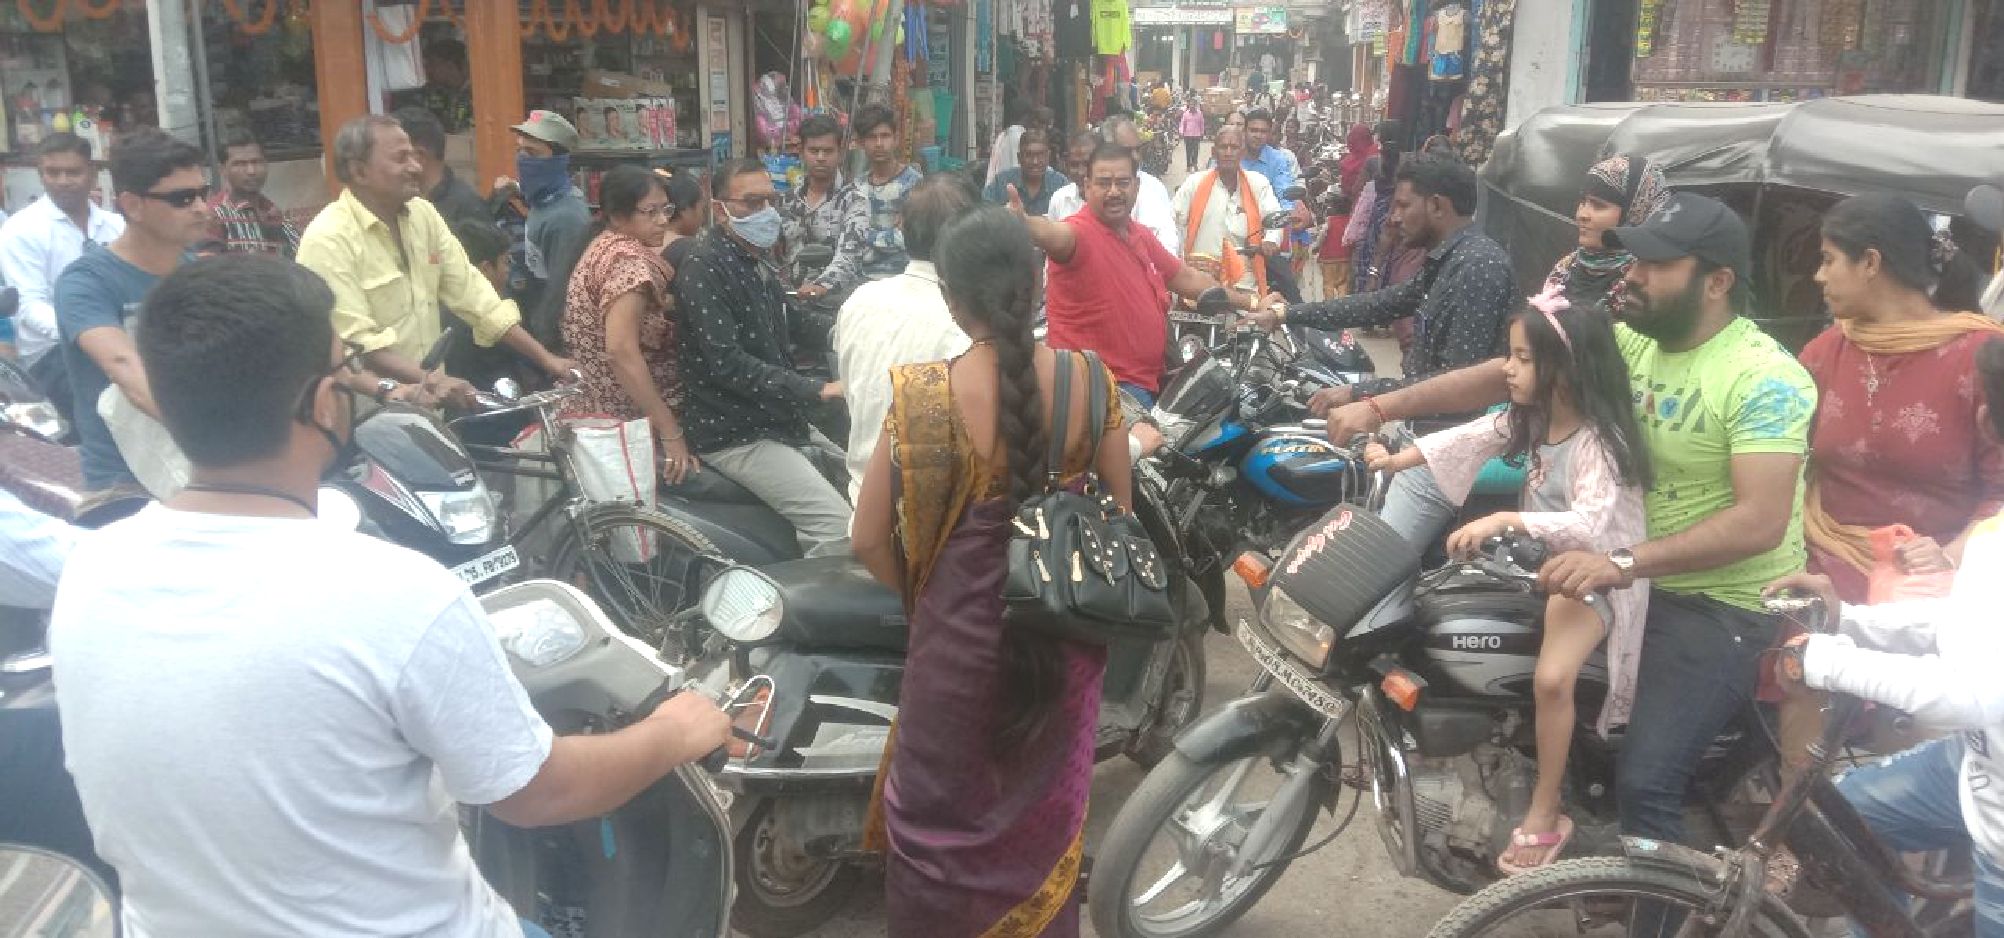 Traffic system deteriorated due to crowd of buyers in the market